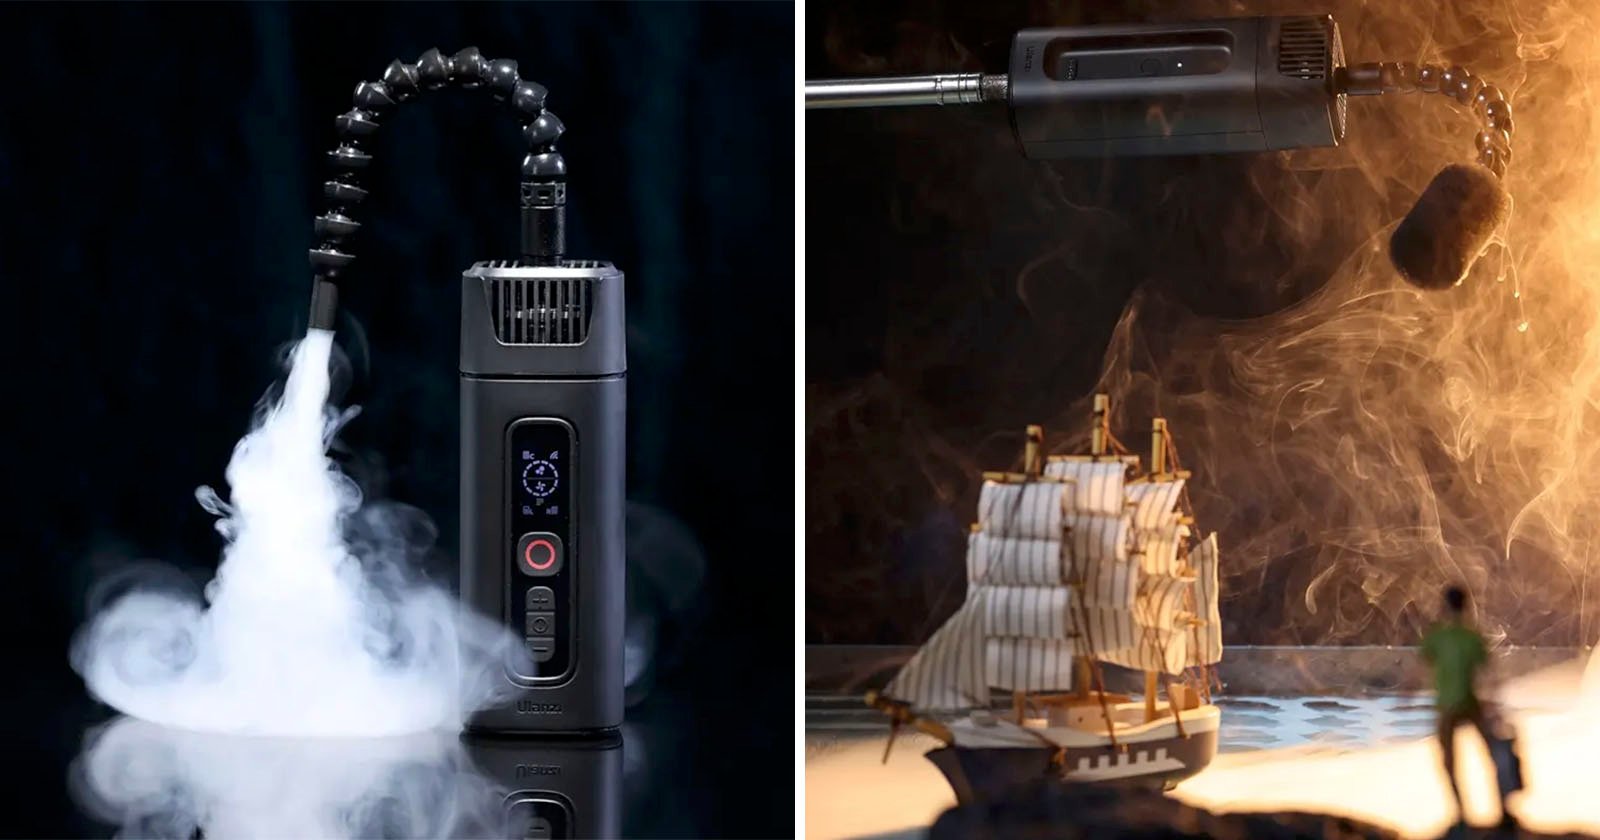 Ulanzi’s New Portable Fog Machine is Handheld and Costs Under $90